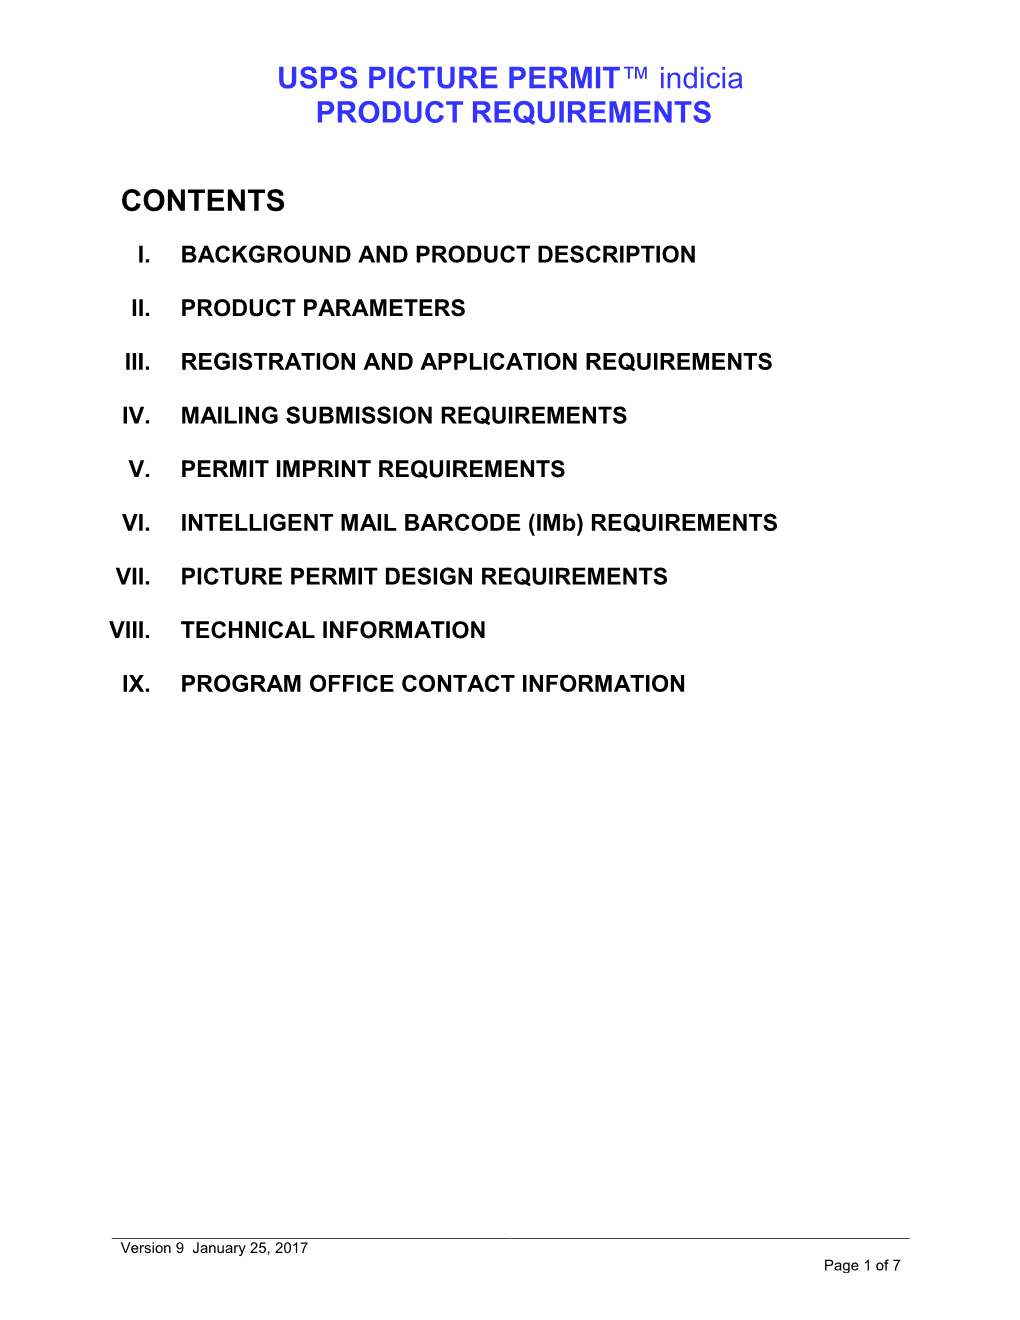 USPS PICTURE PERMIT™ Indicia PRODUCT REQUIREMENTS